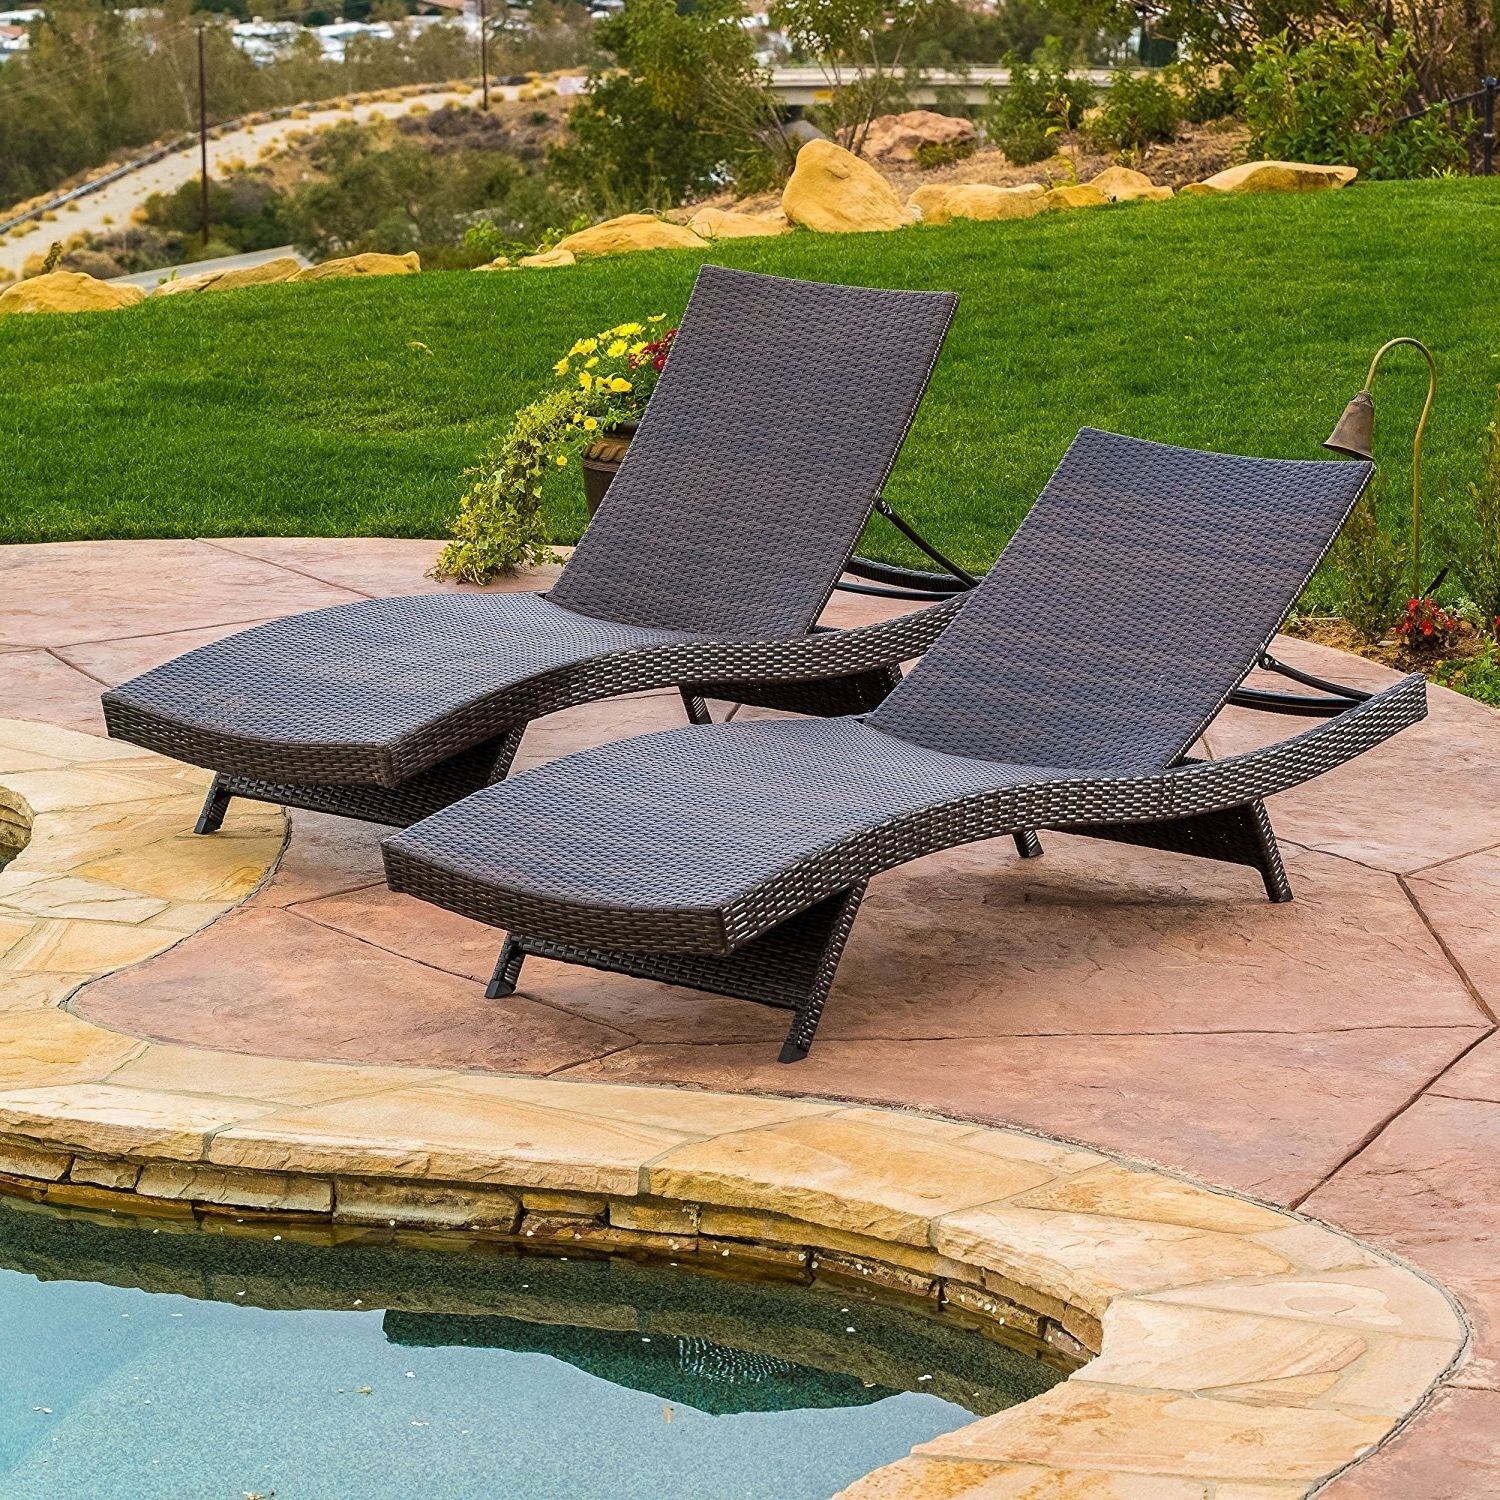 Lakeport Outdoor Adjustable Chaise Lounge Chairs Intended For Latest Amazon : Lakeport Outdoor Adjustable Chaise Lounge Chair (set (View 6 of 15)